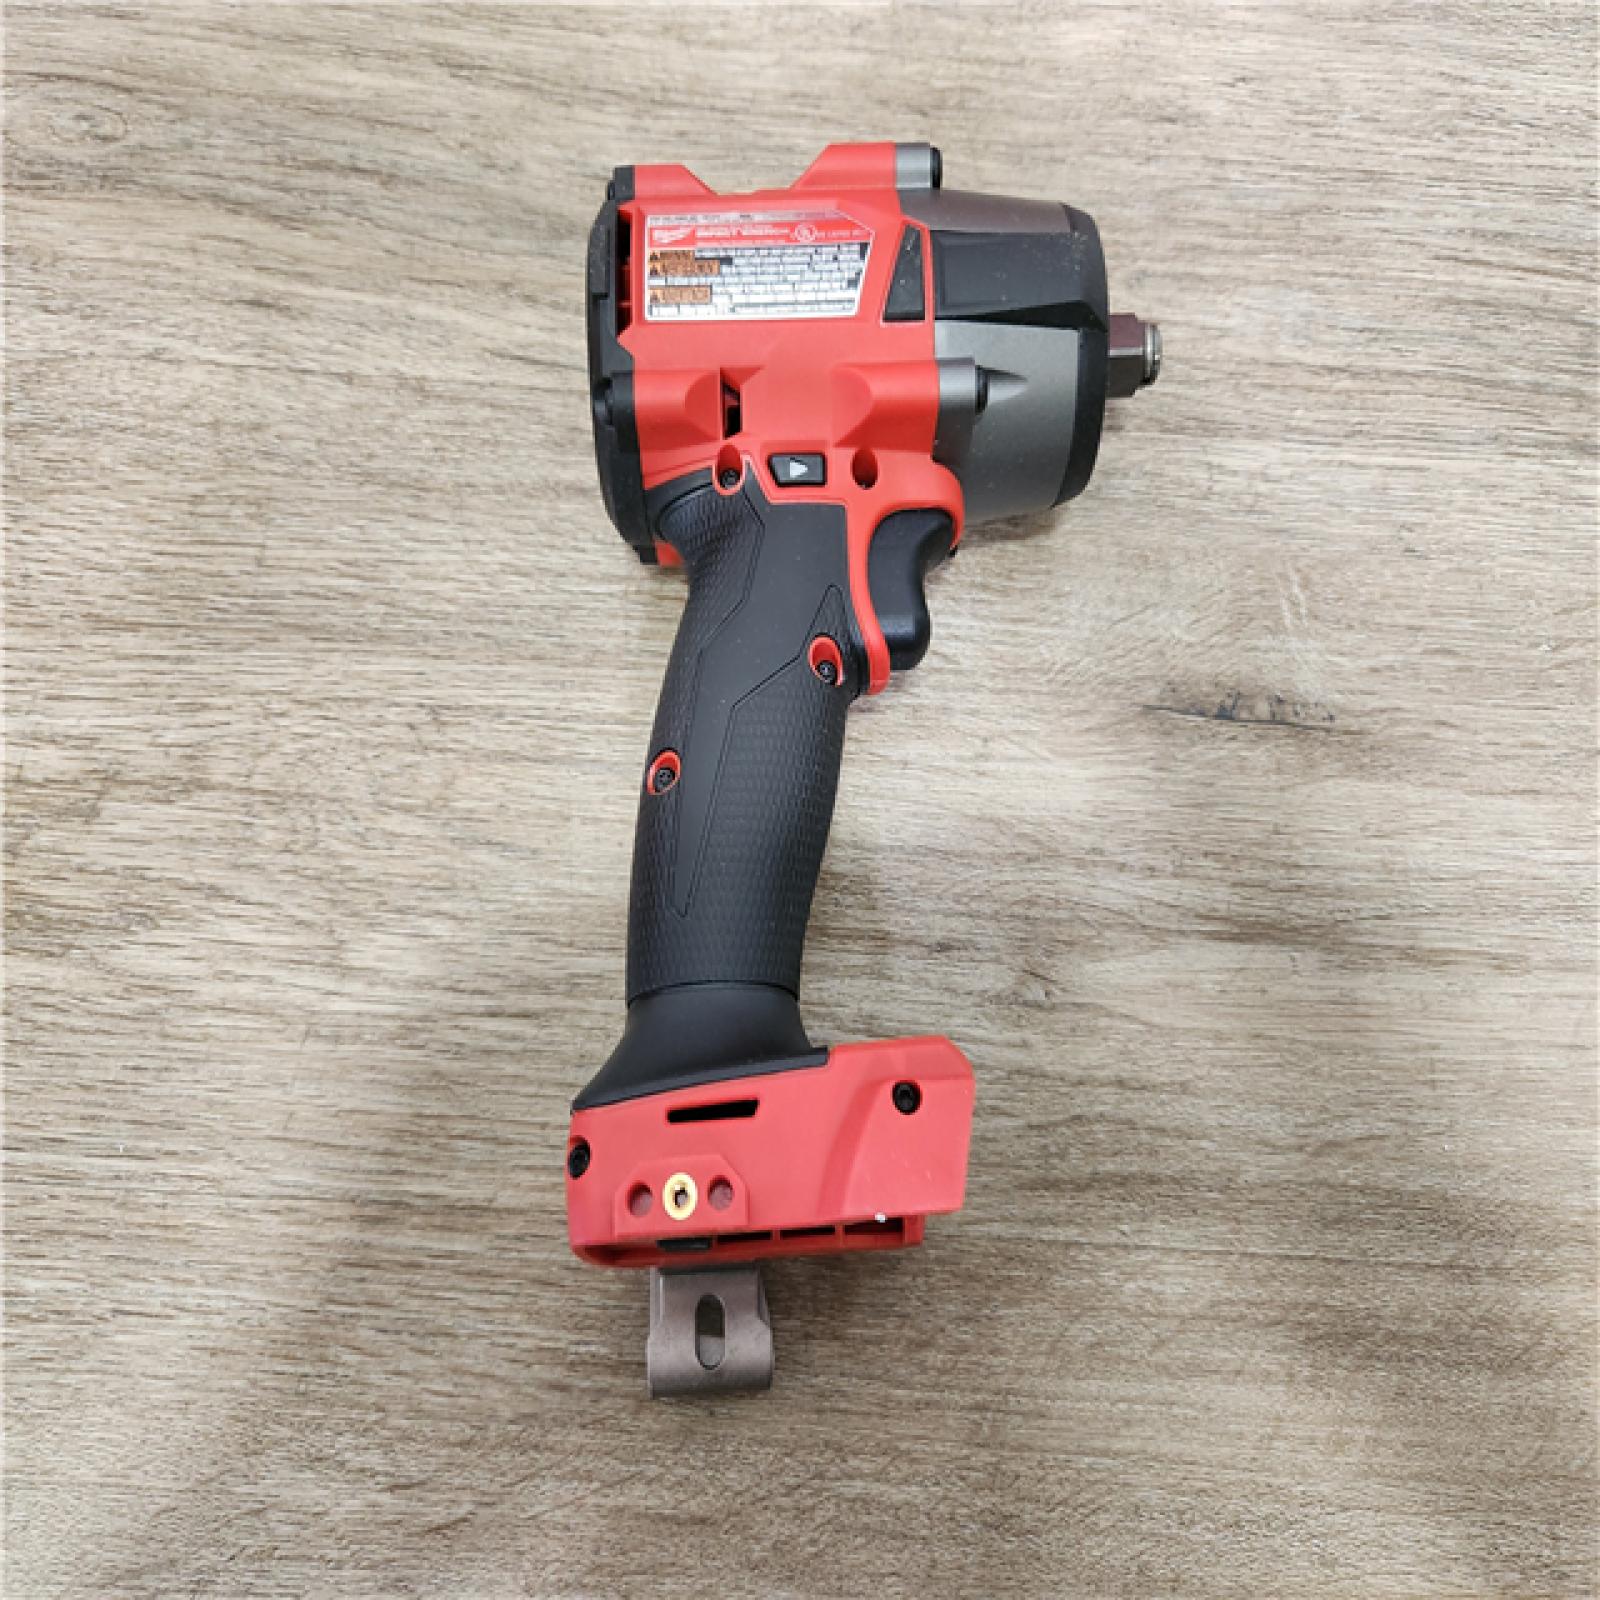 Phoenix Location NEW Milwaukee 2962-20 M18 18V Fuel 1/2 Mid-torque Impact Wrench with Friction Ring